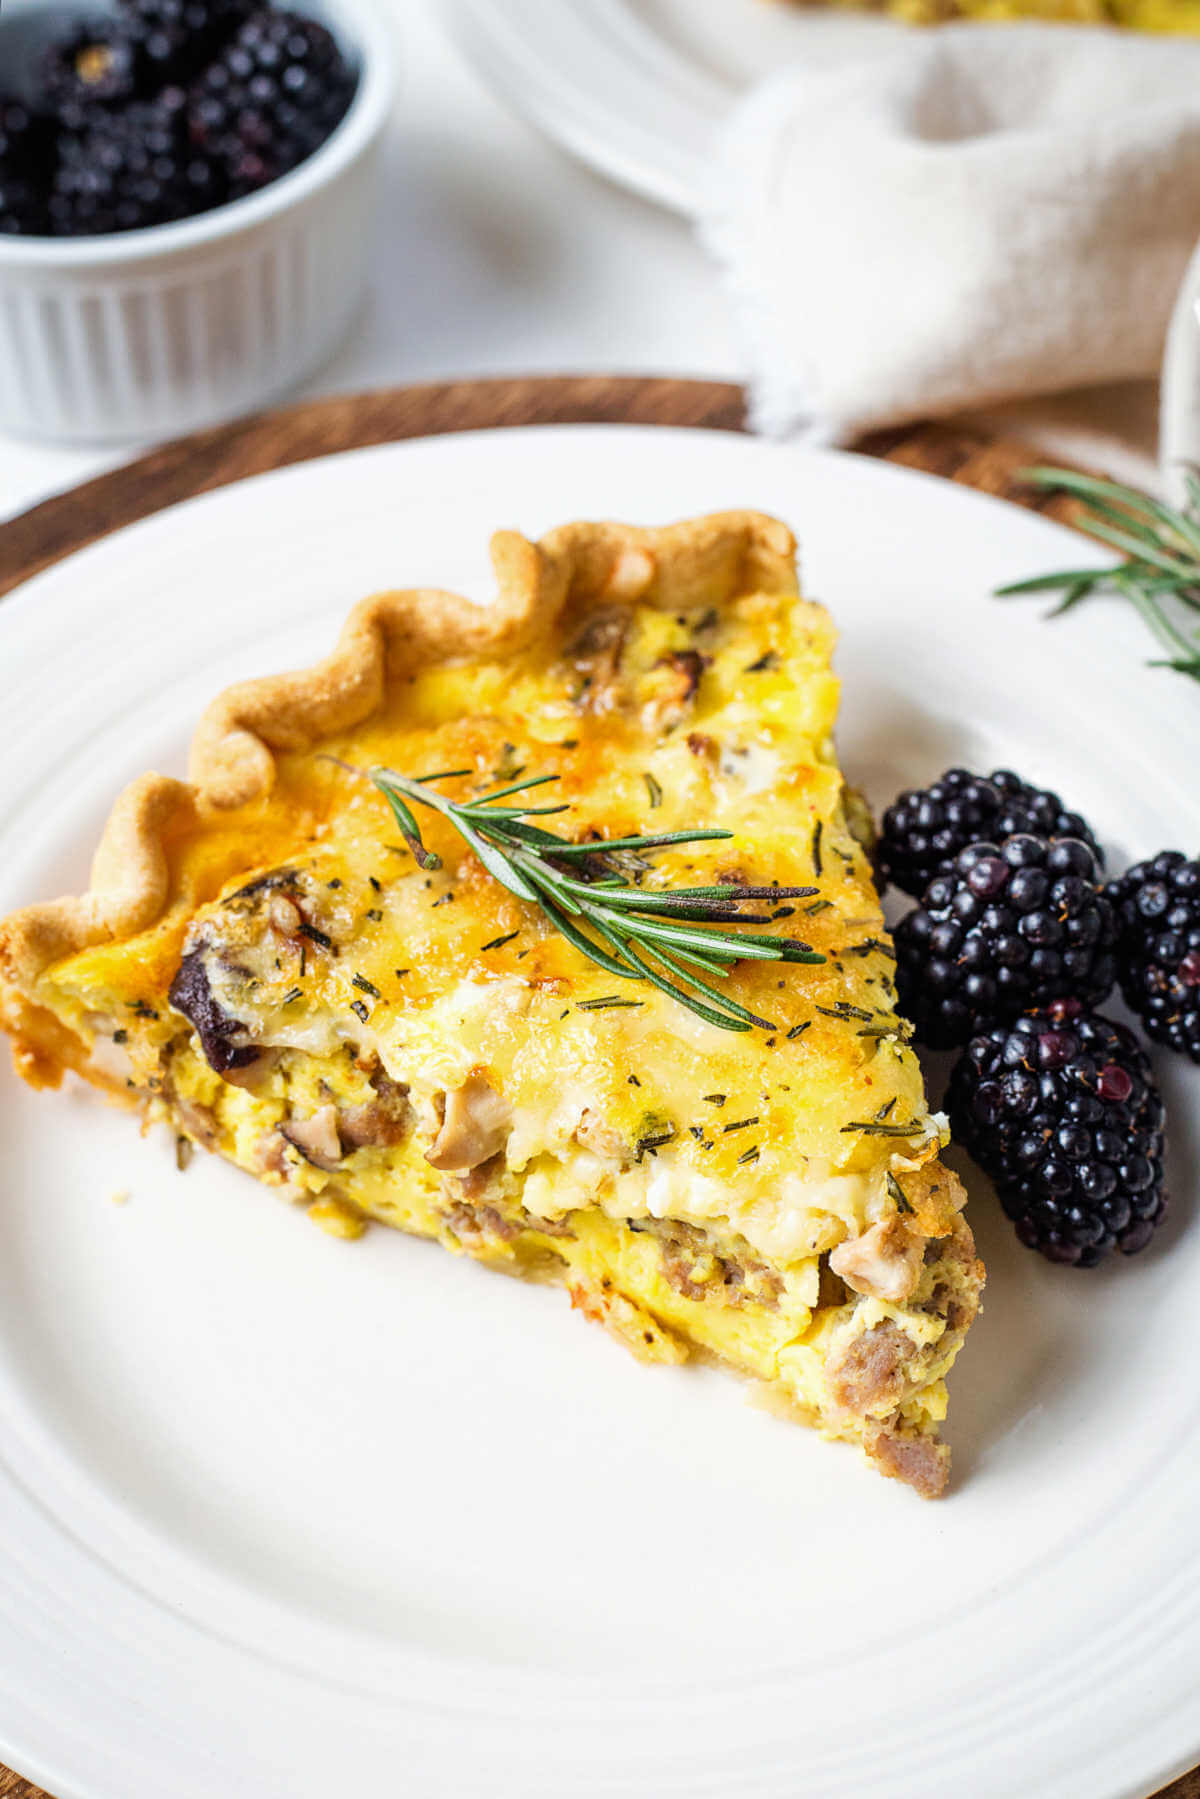 sausage quiche with blackberries on a plate on a table.